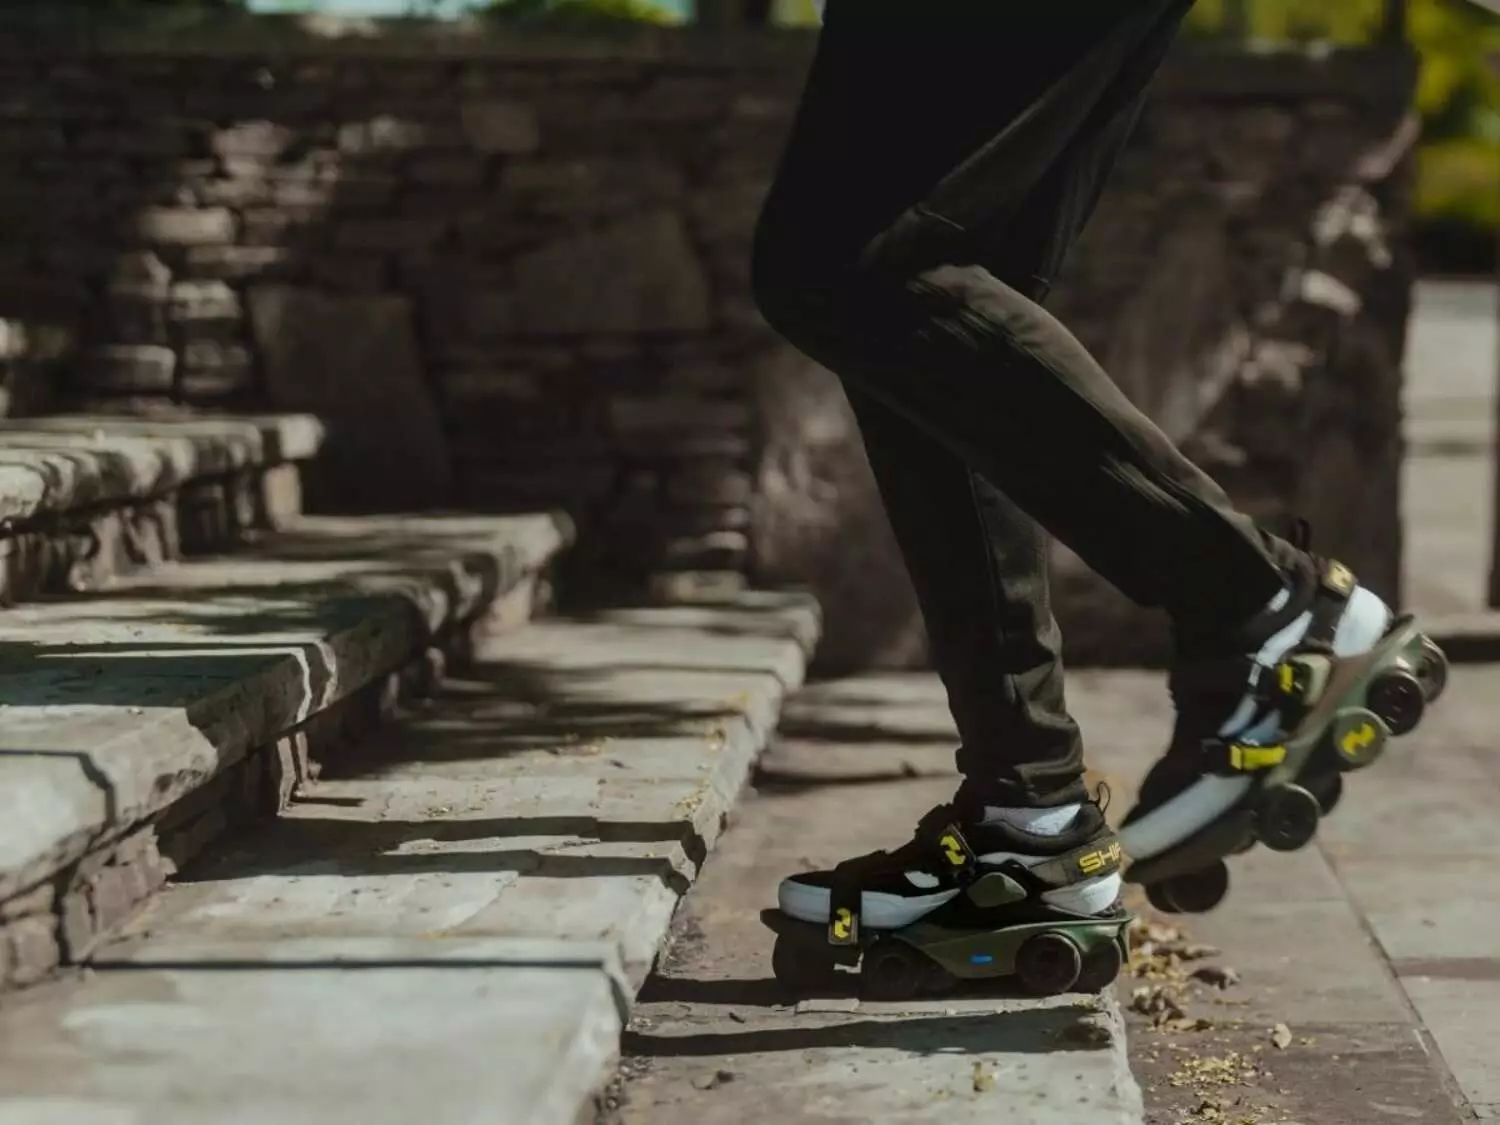 us firm creates worlds fastest shoe increase walking speed by 250 percent